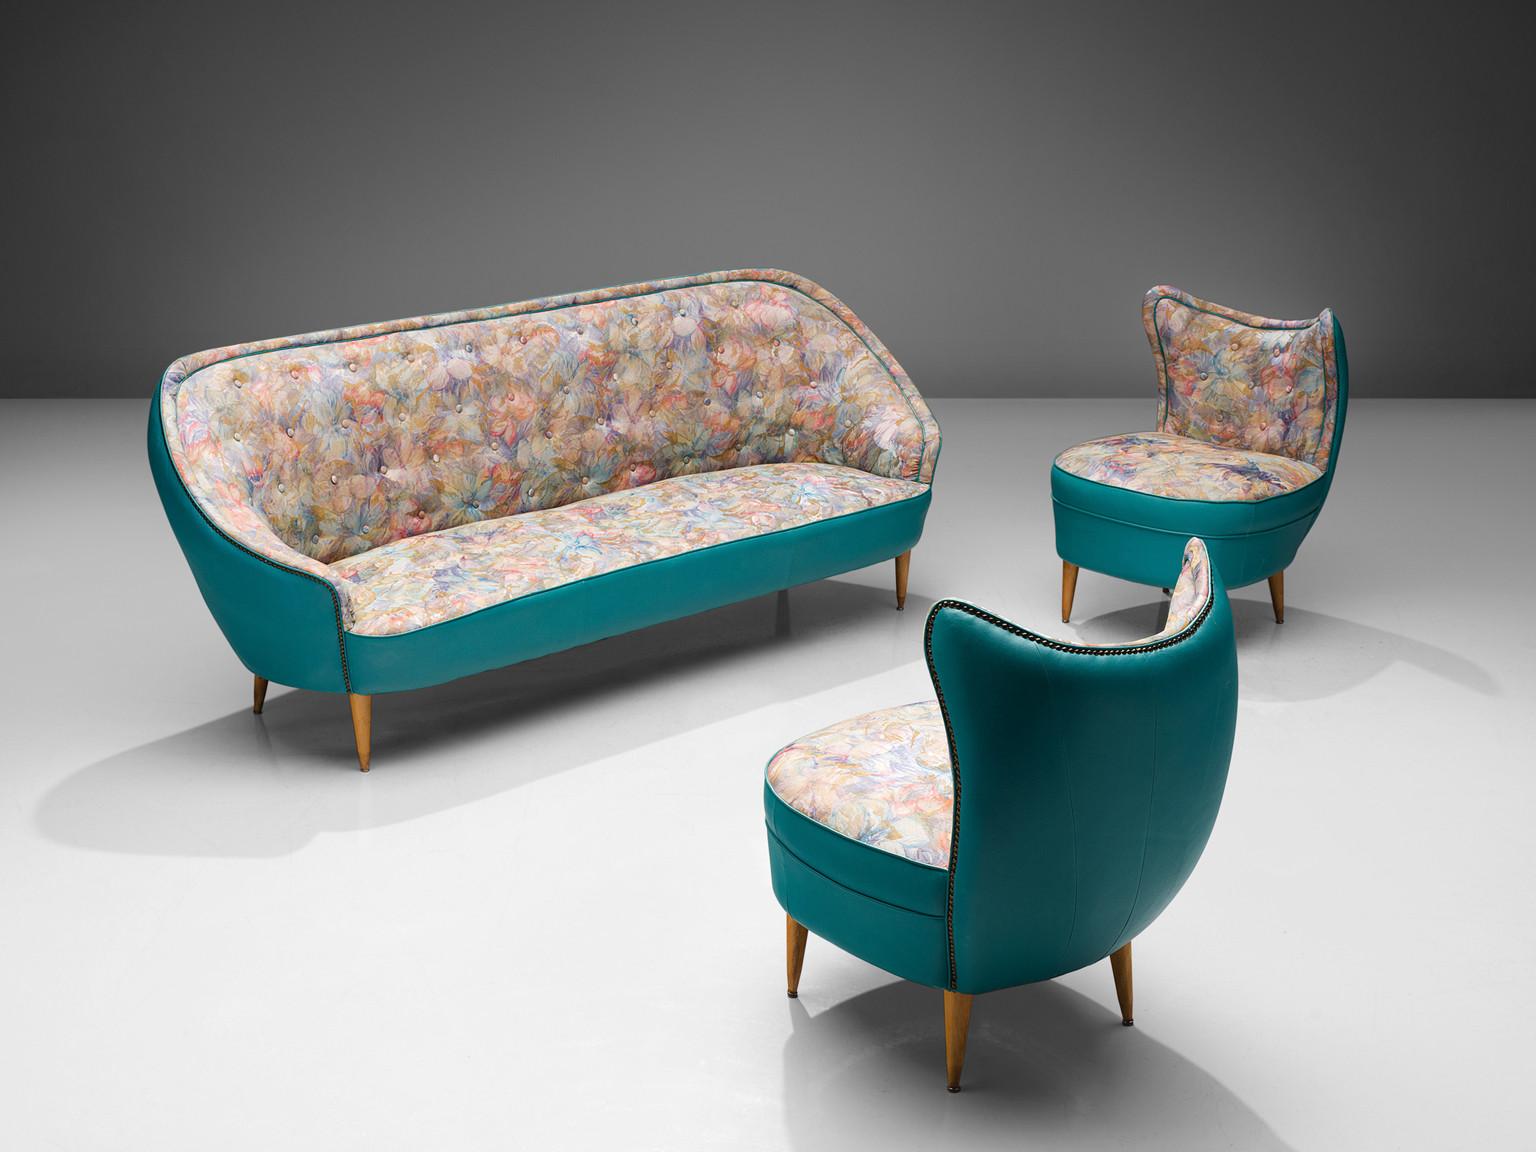 Classic Italian Pair of Lounge Chairs in Turquoise Leatherette